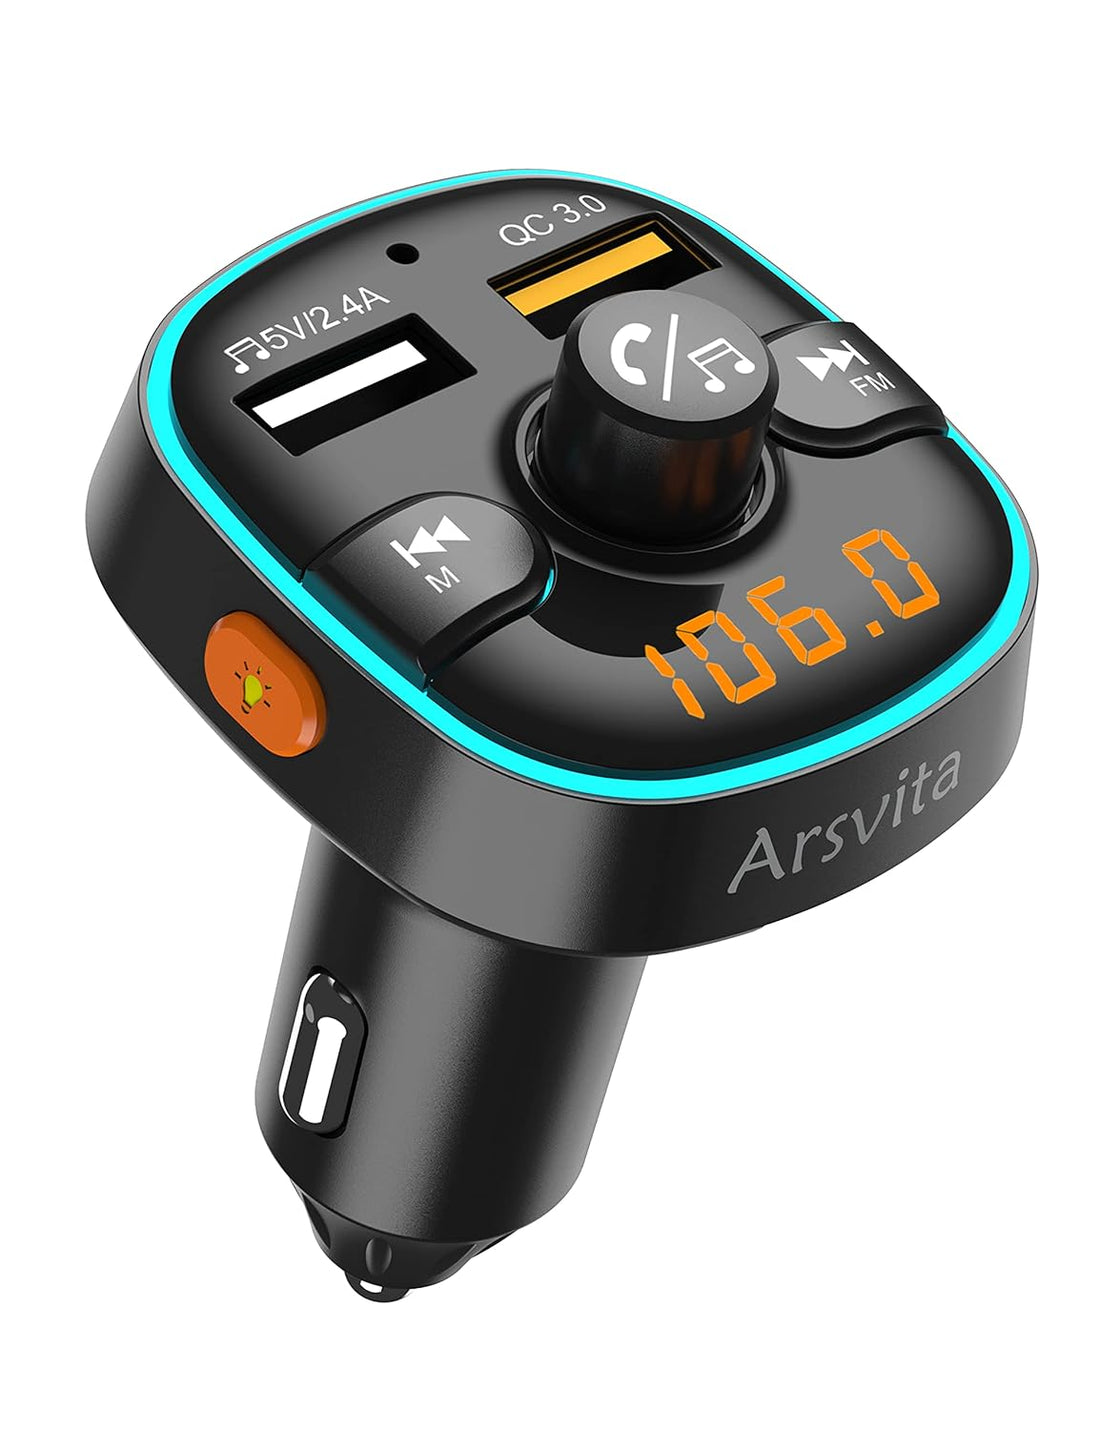 Arsvita Bluetooth Car FM Transmitter, Wireless Audio Adapter Receiver, Support Siri/Google Voice Wake-up, Color Light, with QC3.0 Quick Charge Dual USB Ports and Support TF Card